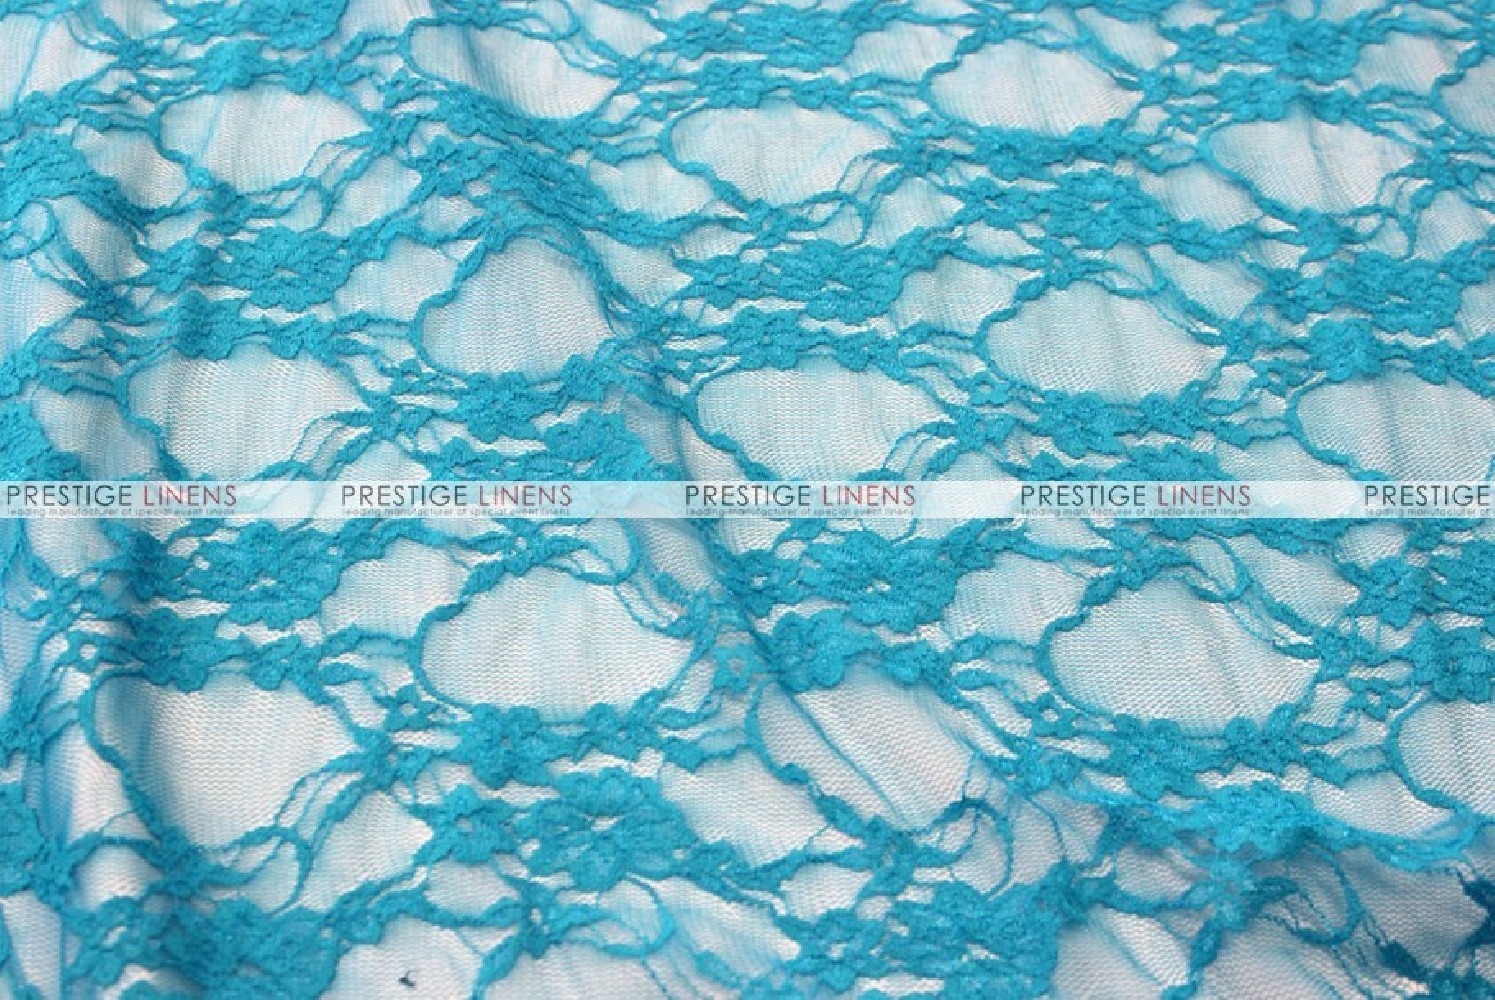 Stretch Lace in Blue - All About Fabrics